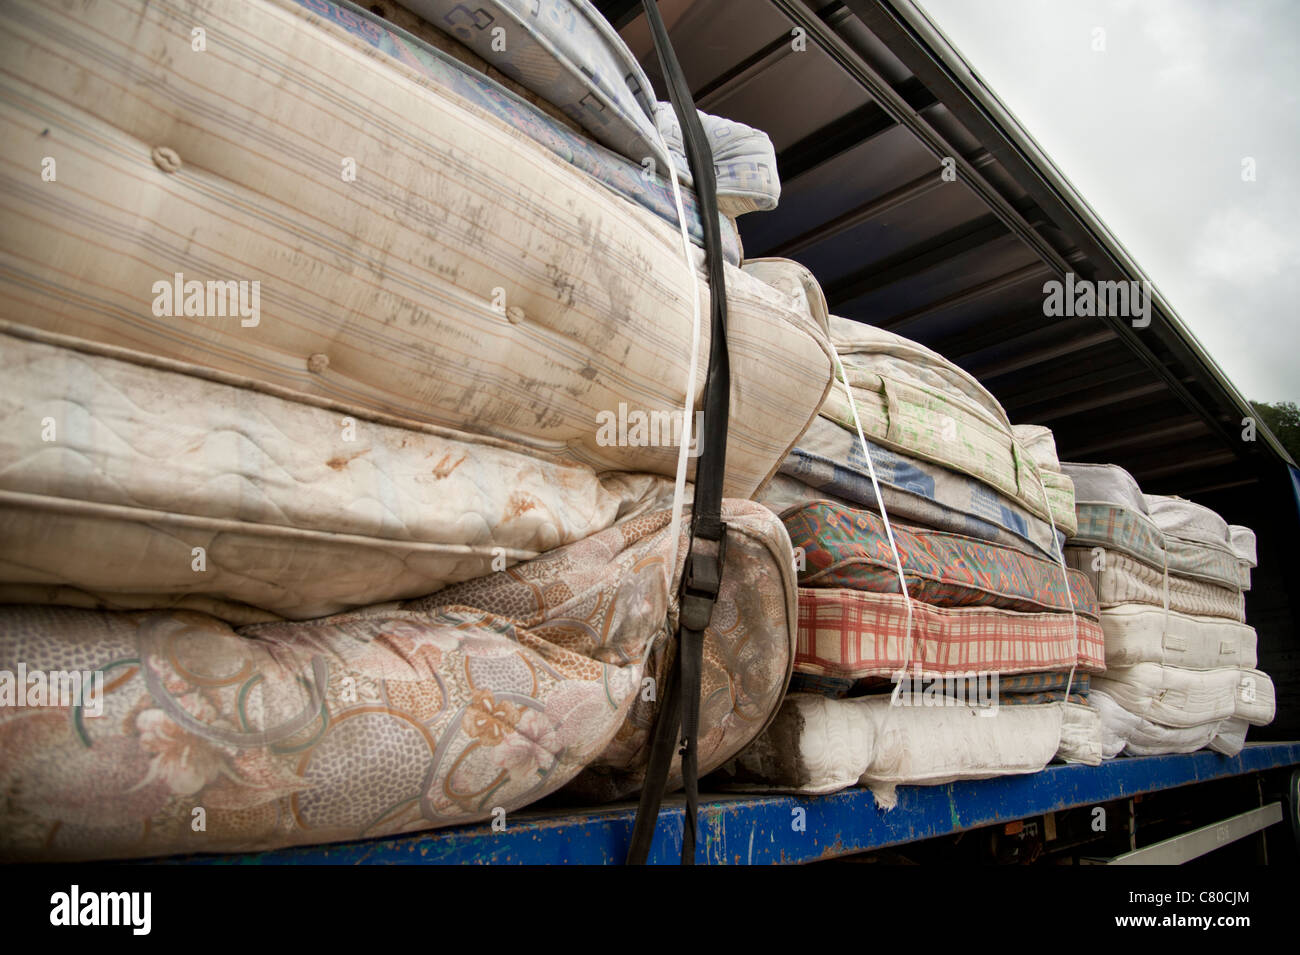 Old mattresses stacked on  ruck awaiting disposal or recycling, UK Stock Photo